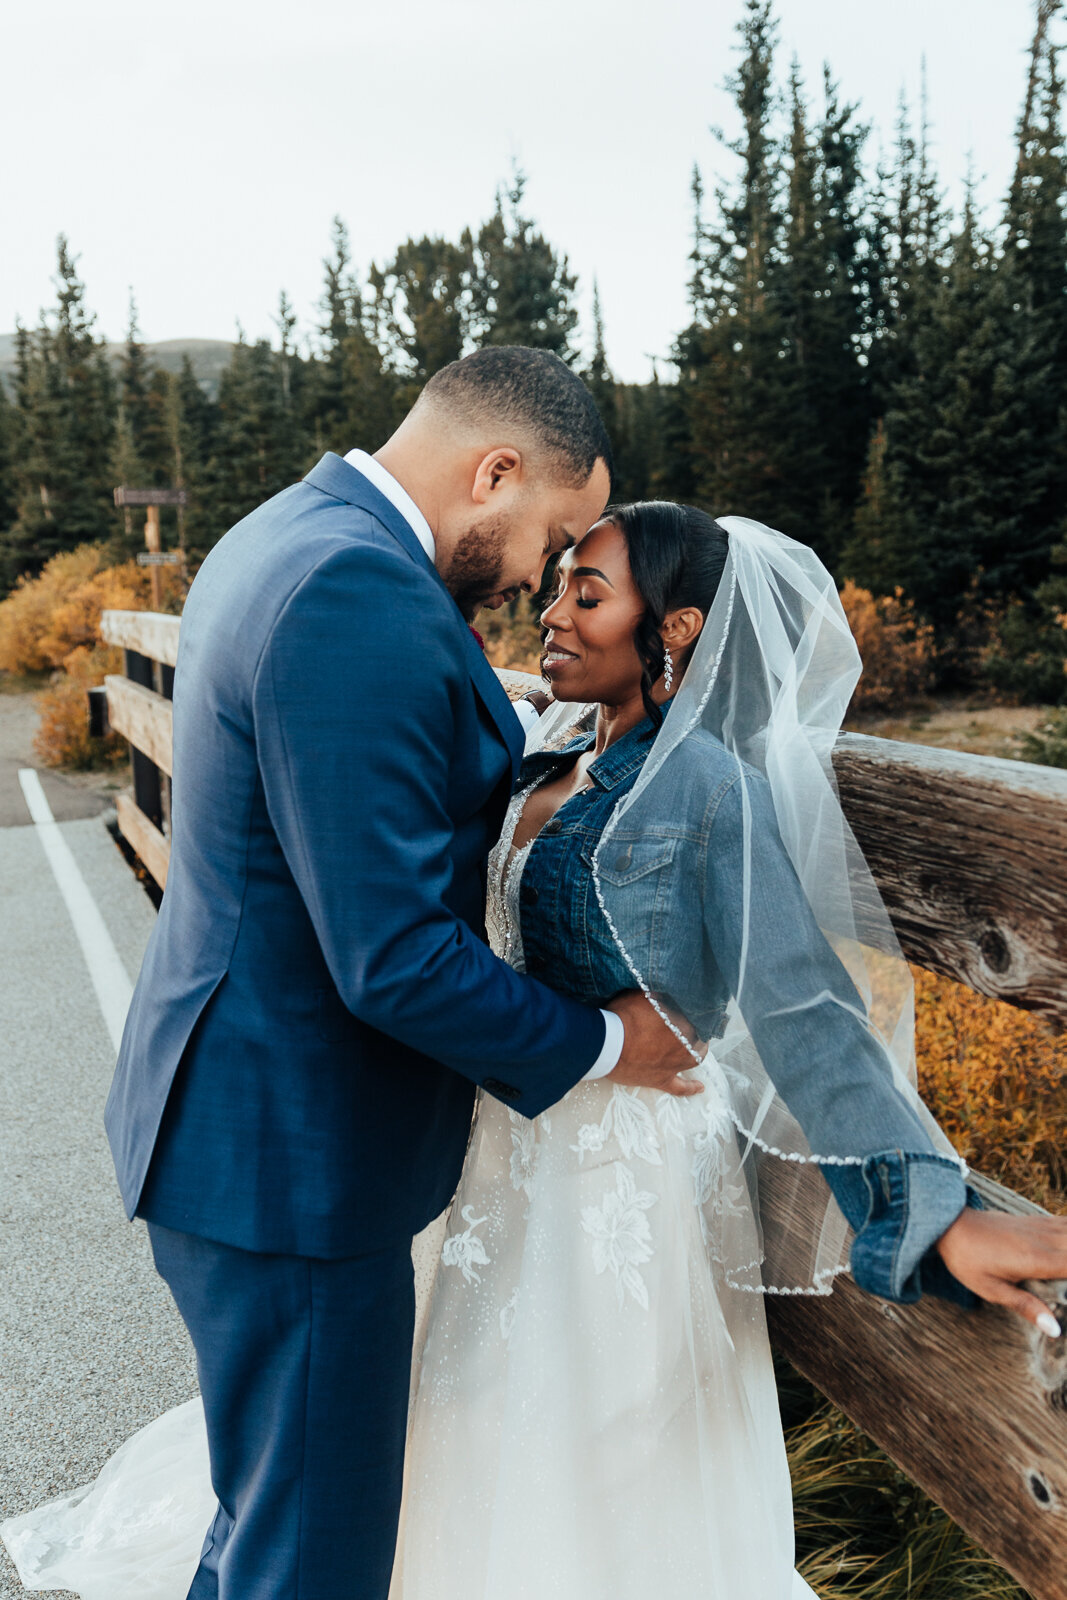 Elope with Style: Jessica Margaret's Artistic Lens on Colorado's Breathtaking Backdrops